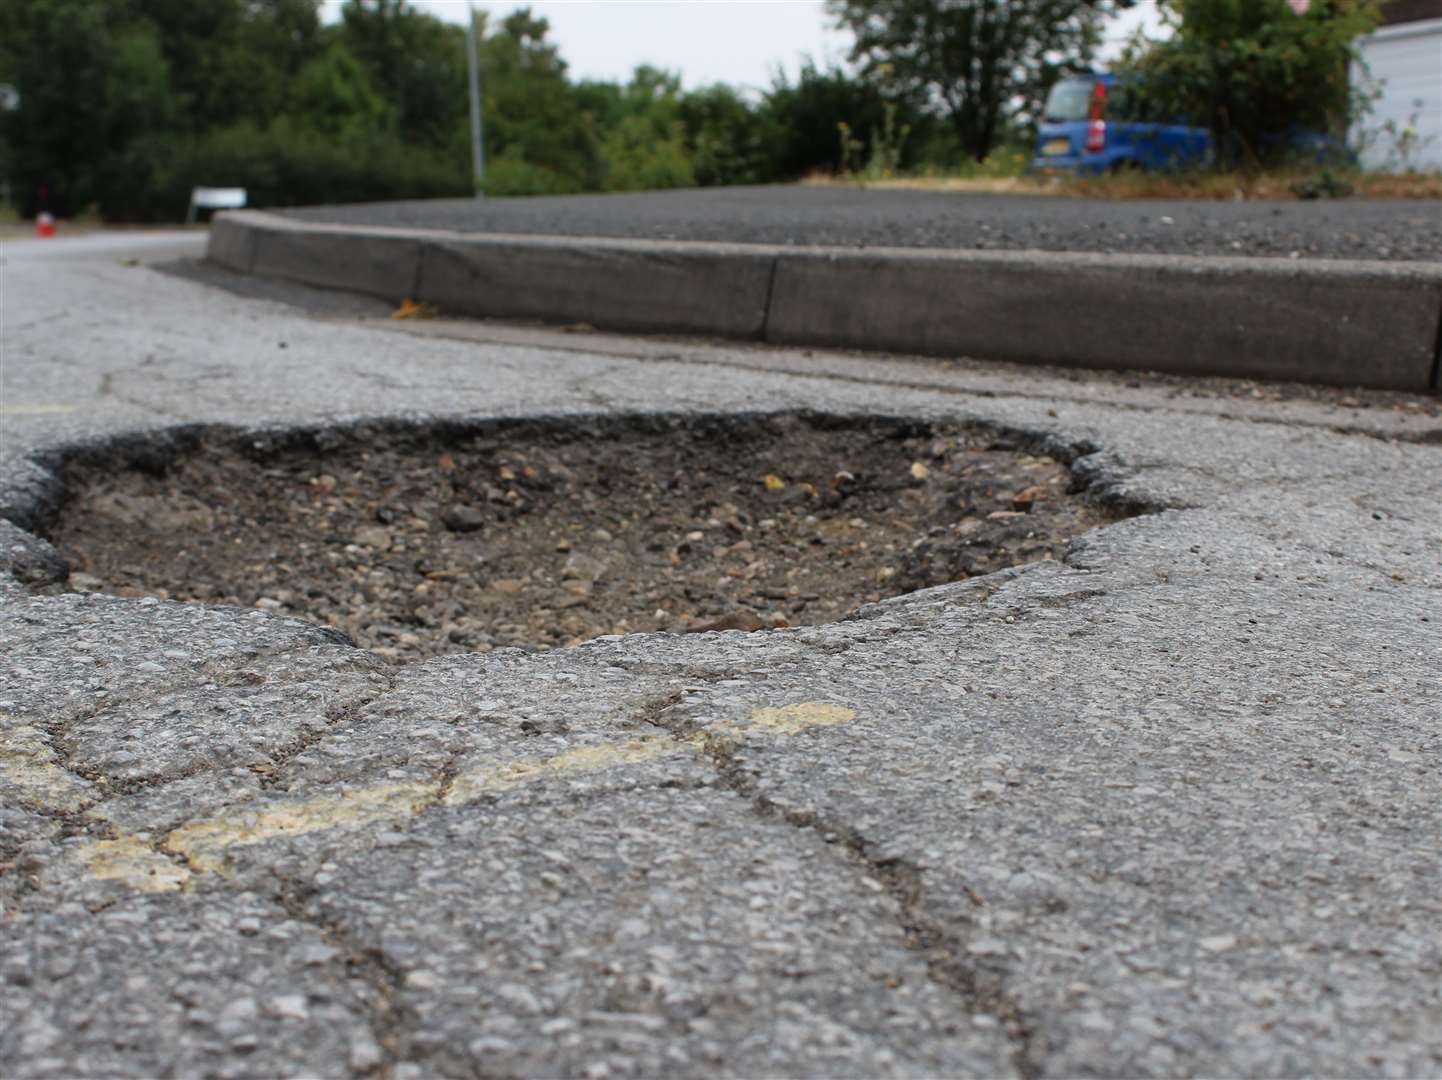 Potholes are a big issue in Kent